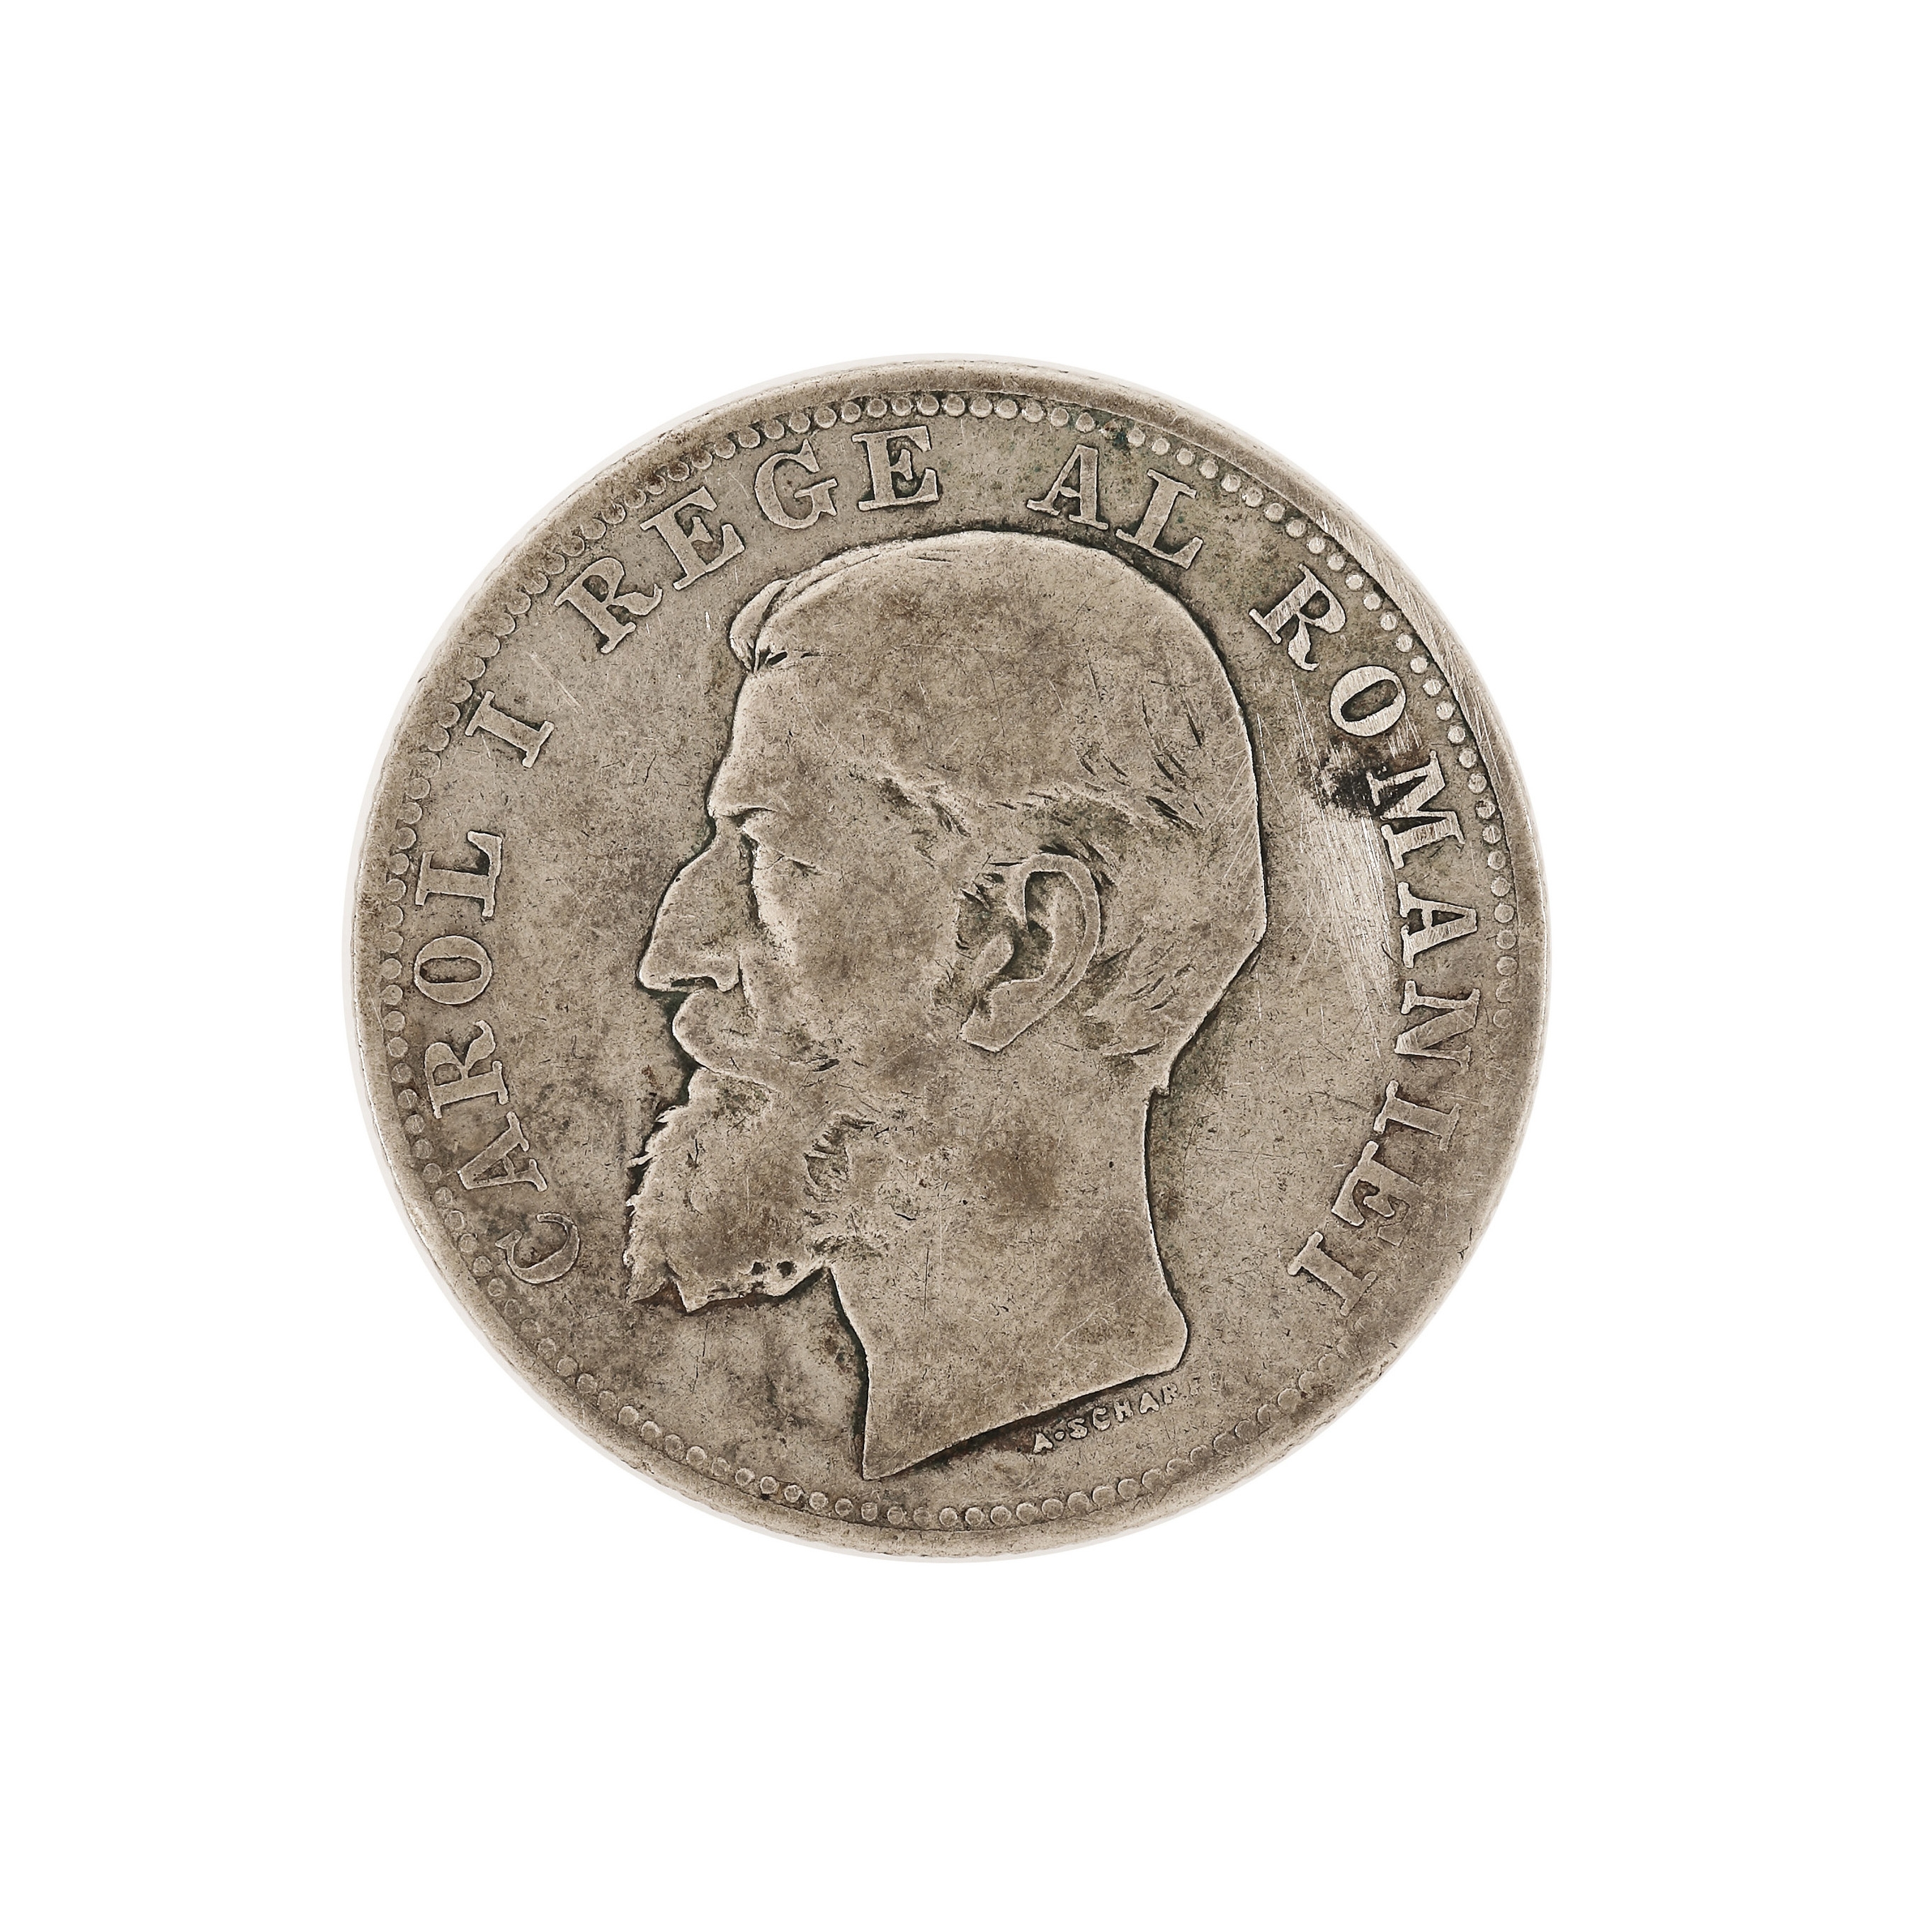 2 Lei 1894 coin, silver - Image 2 of 2